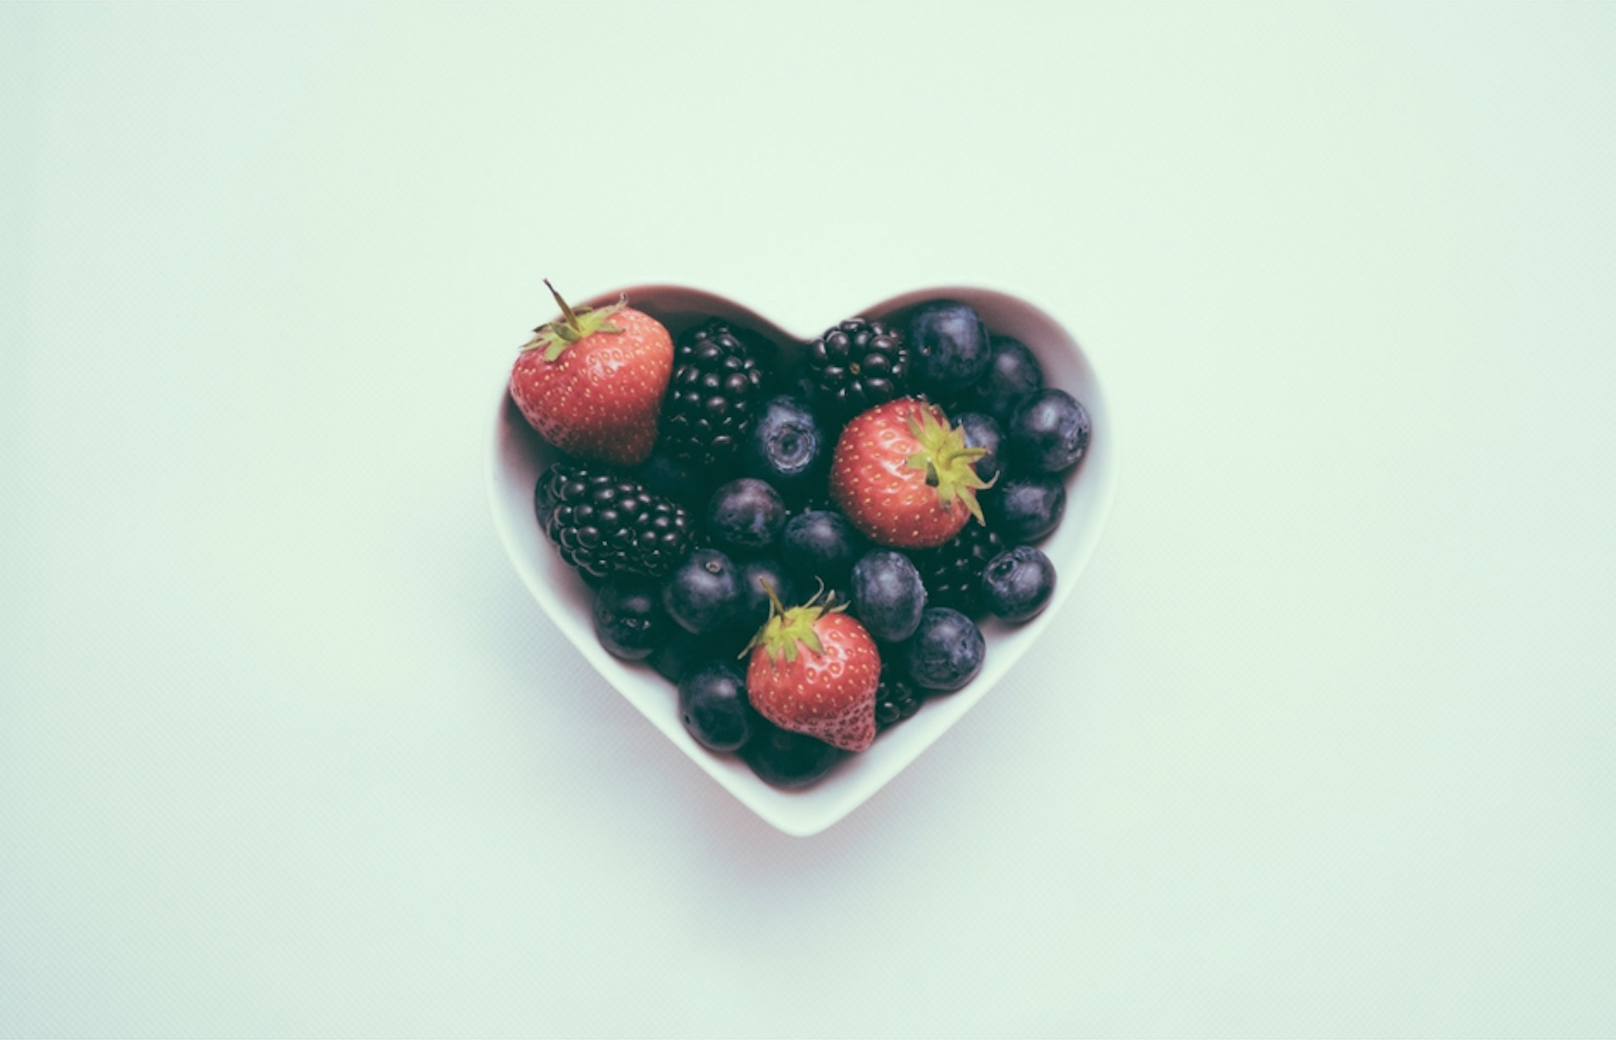 heart shaped bowl of fruit -Heart Attack Prevention